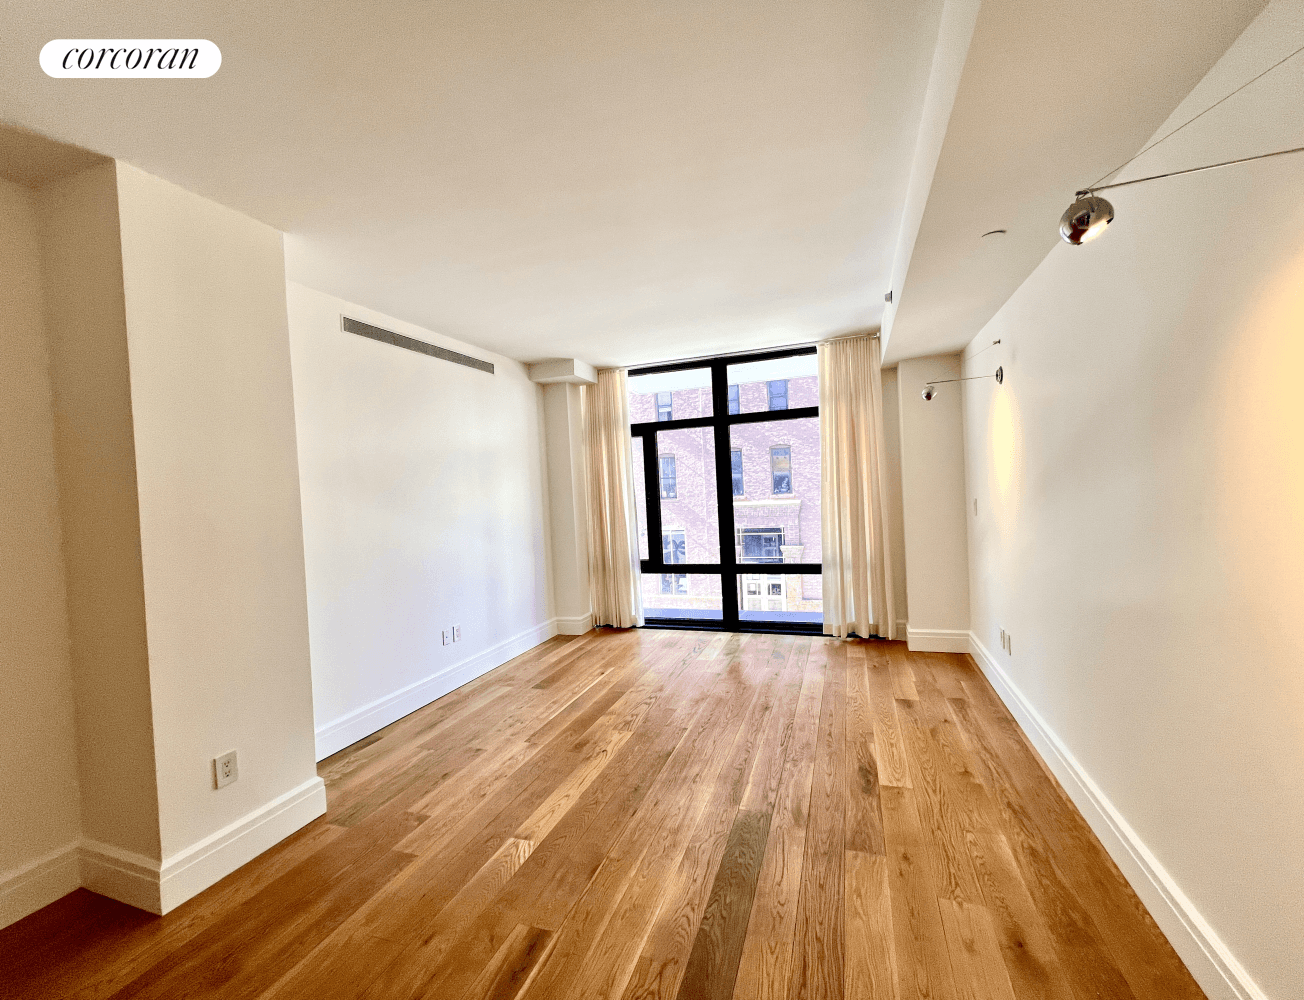 ELEGANT amp ; BEAUTIFULLY DESIGNED ONE BEDROOM APARTMENT IN THE HEART OF DUMBO !